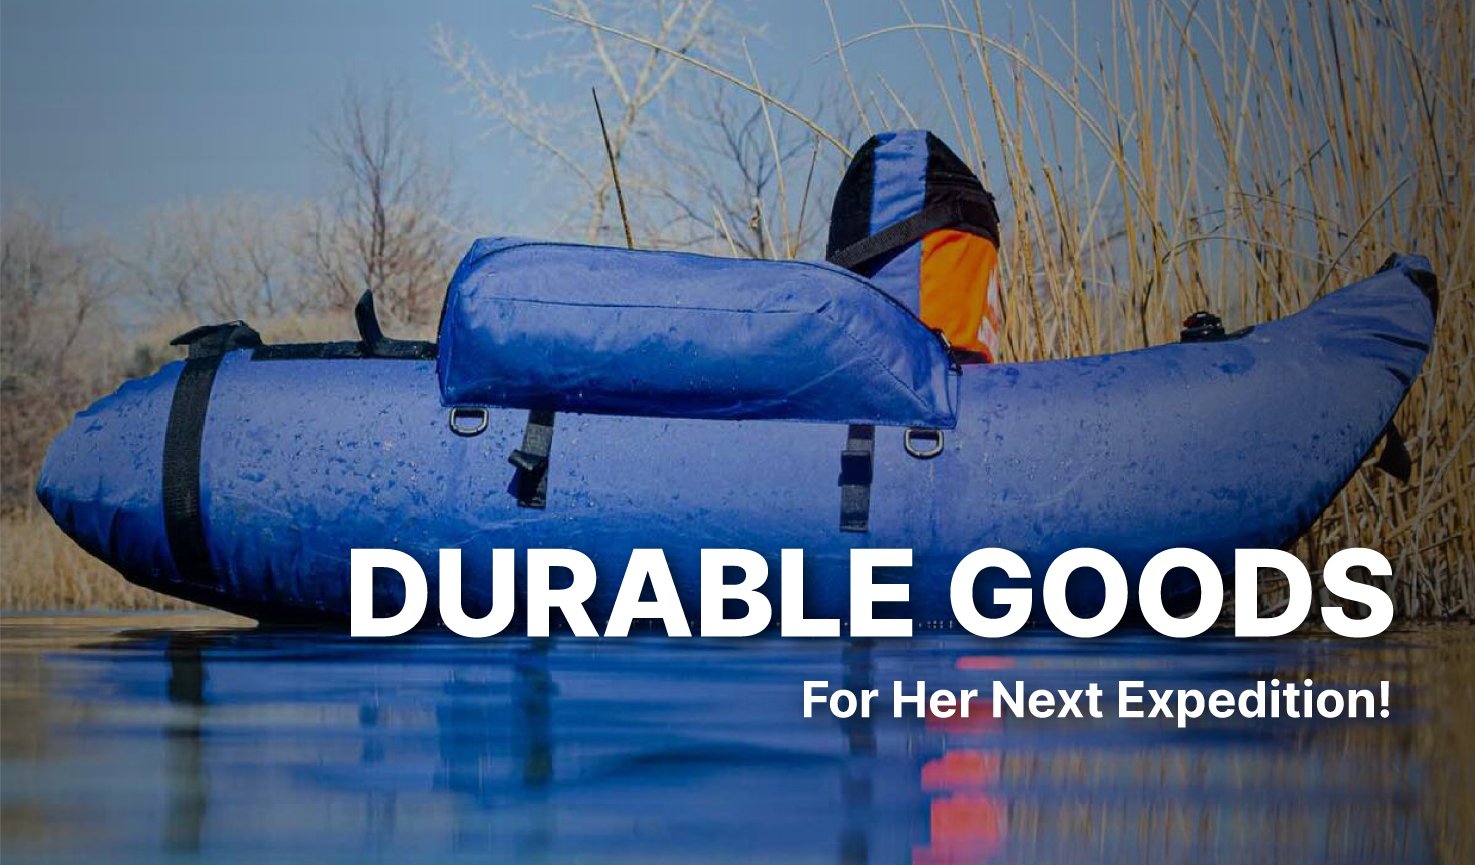 Durable good for her next expedition